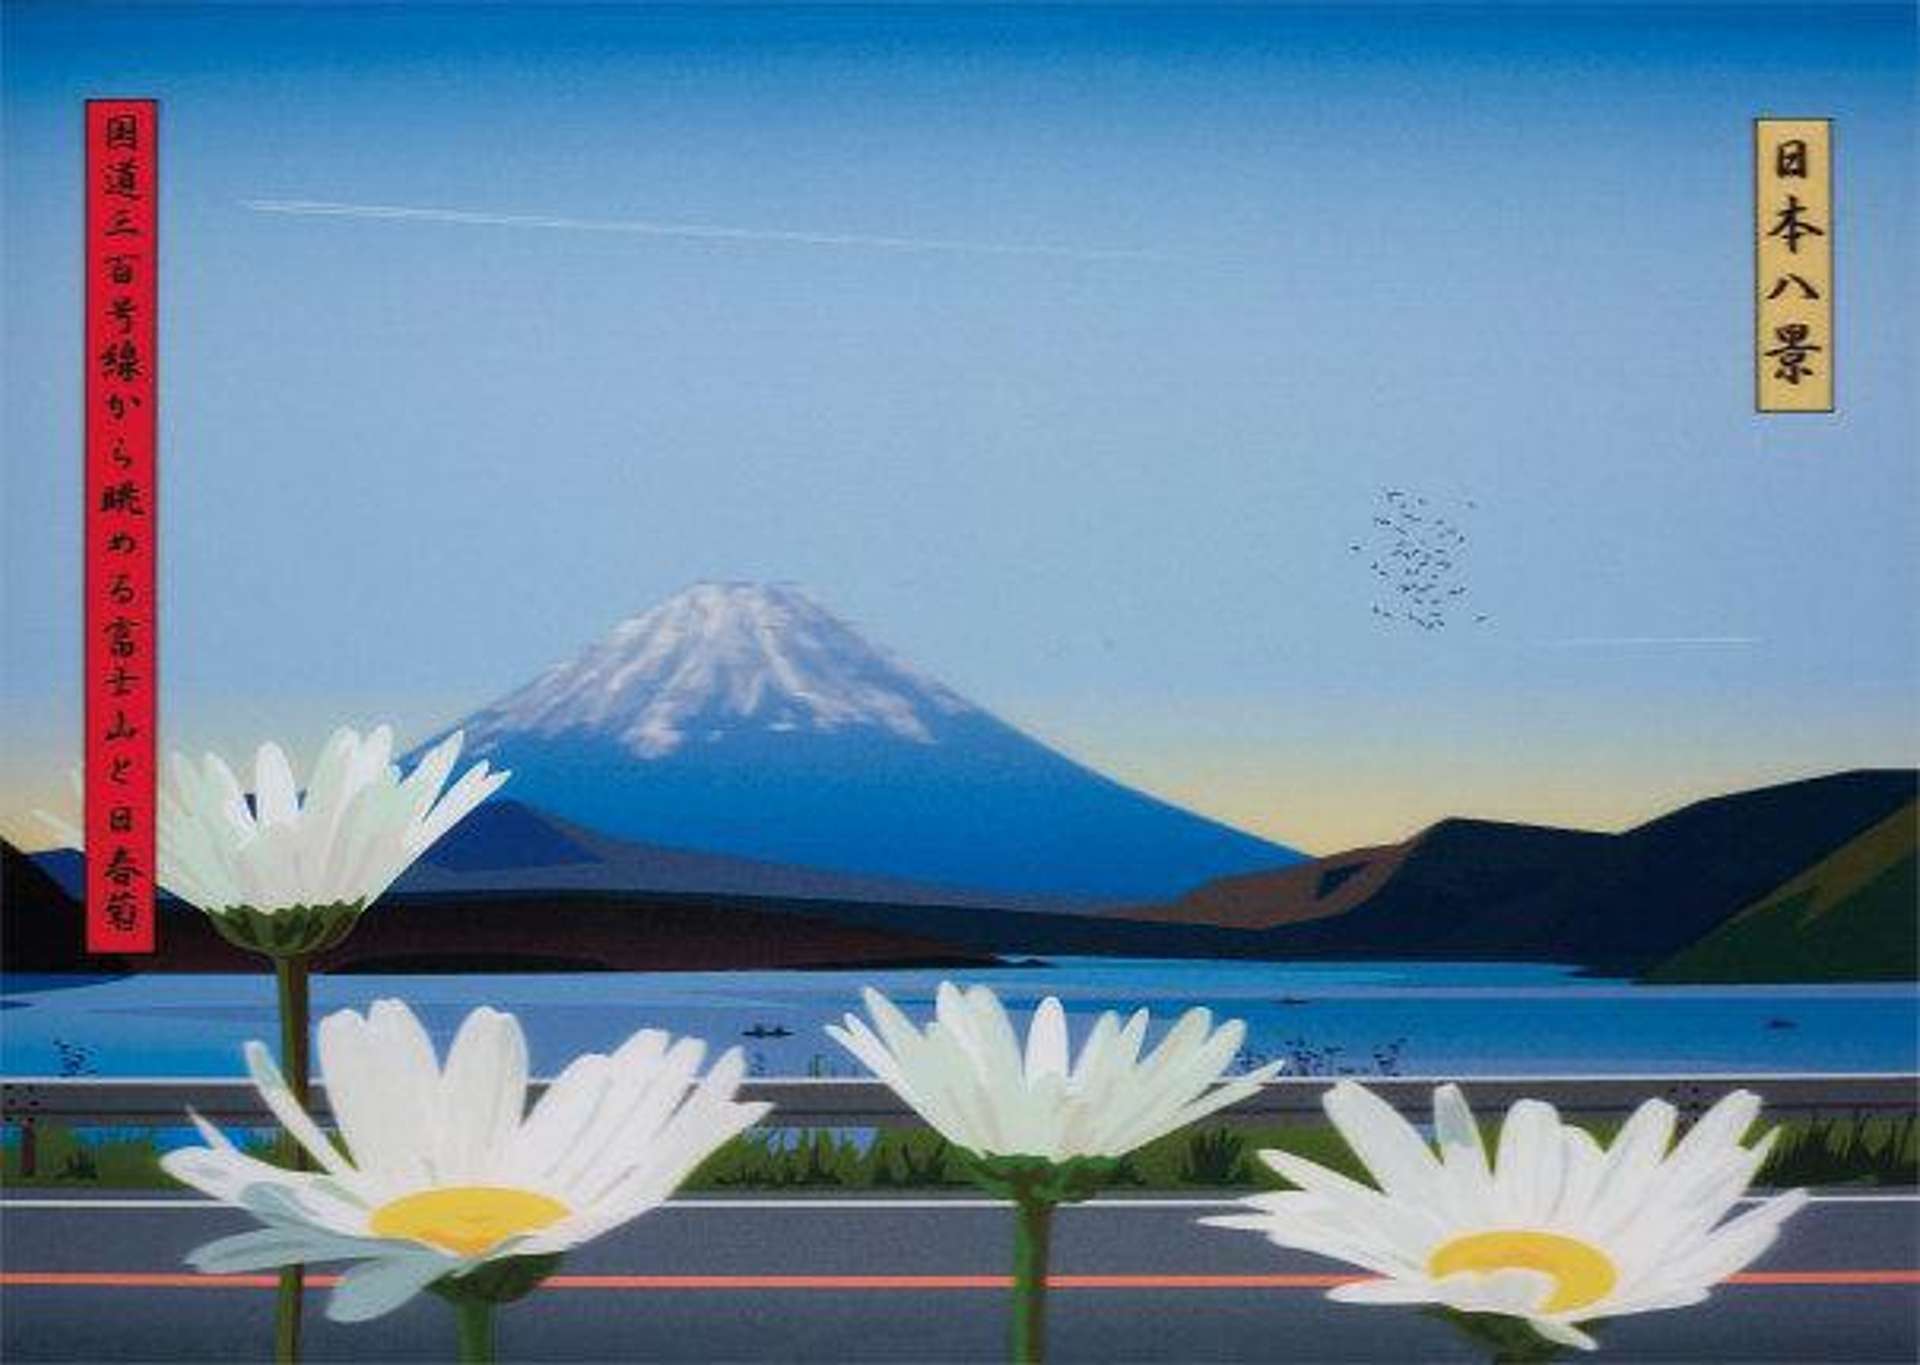 View Of Mount Fuji With Daisies From Route 300 - Signed Mixed Media by Julian Opie 2009 - MyArtBroker